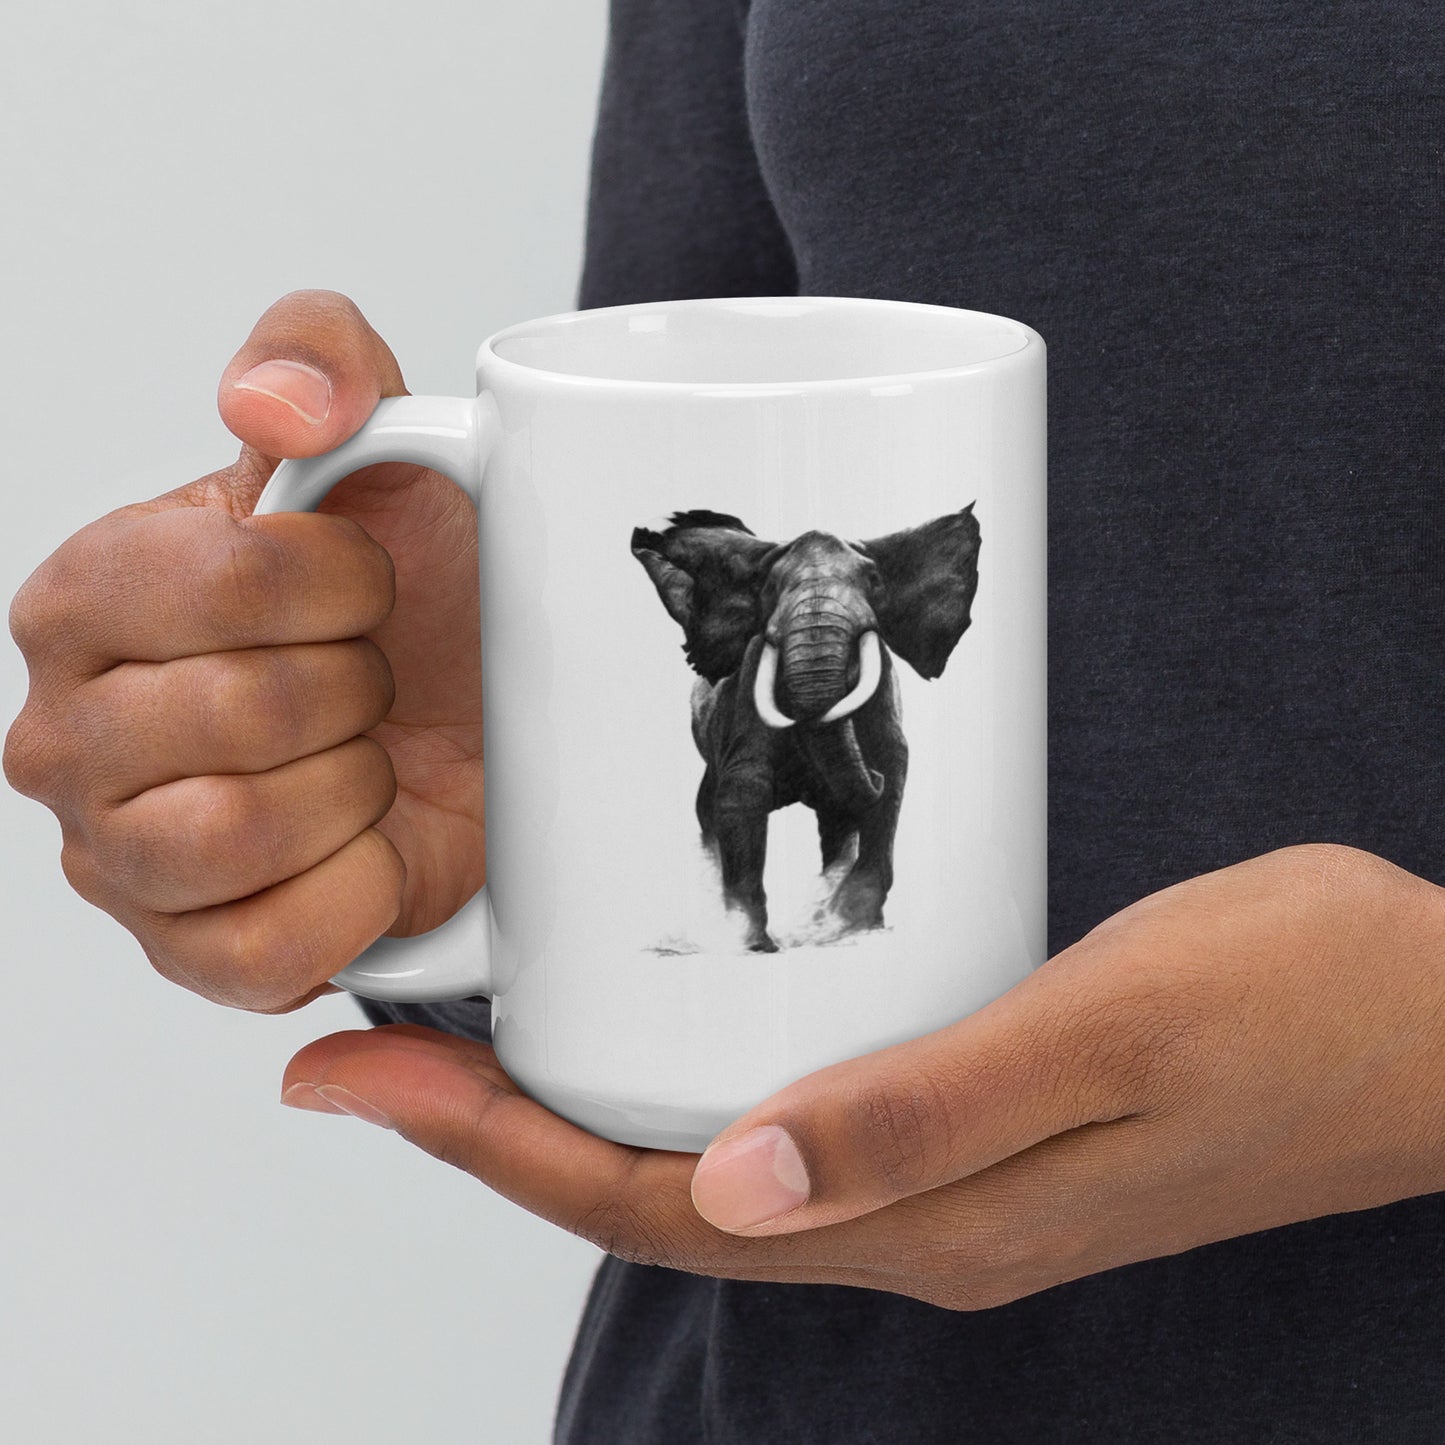 This "Elephant White Glossy Mug" is from a drawing of mine created with a graphite pencil. It has been digitally optimized and transferred to a 15oz white glossy mug.